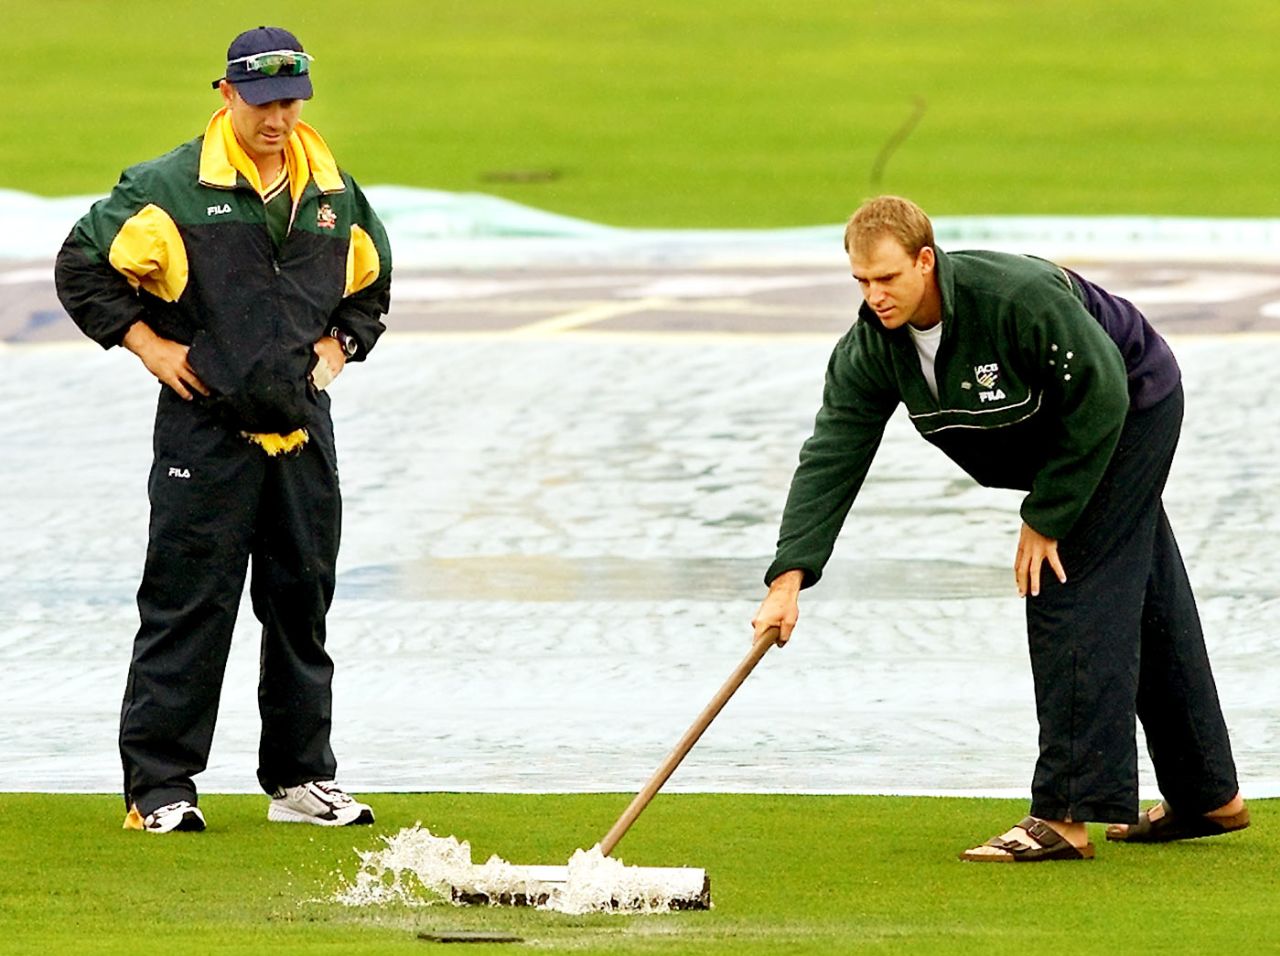 Justin Langer watches as Matthew Hayden sweeps the water away, England v Australia, 4th Test, Headingley, 1st day, August 16, 2001